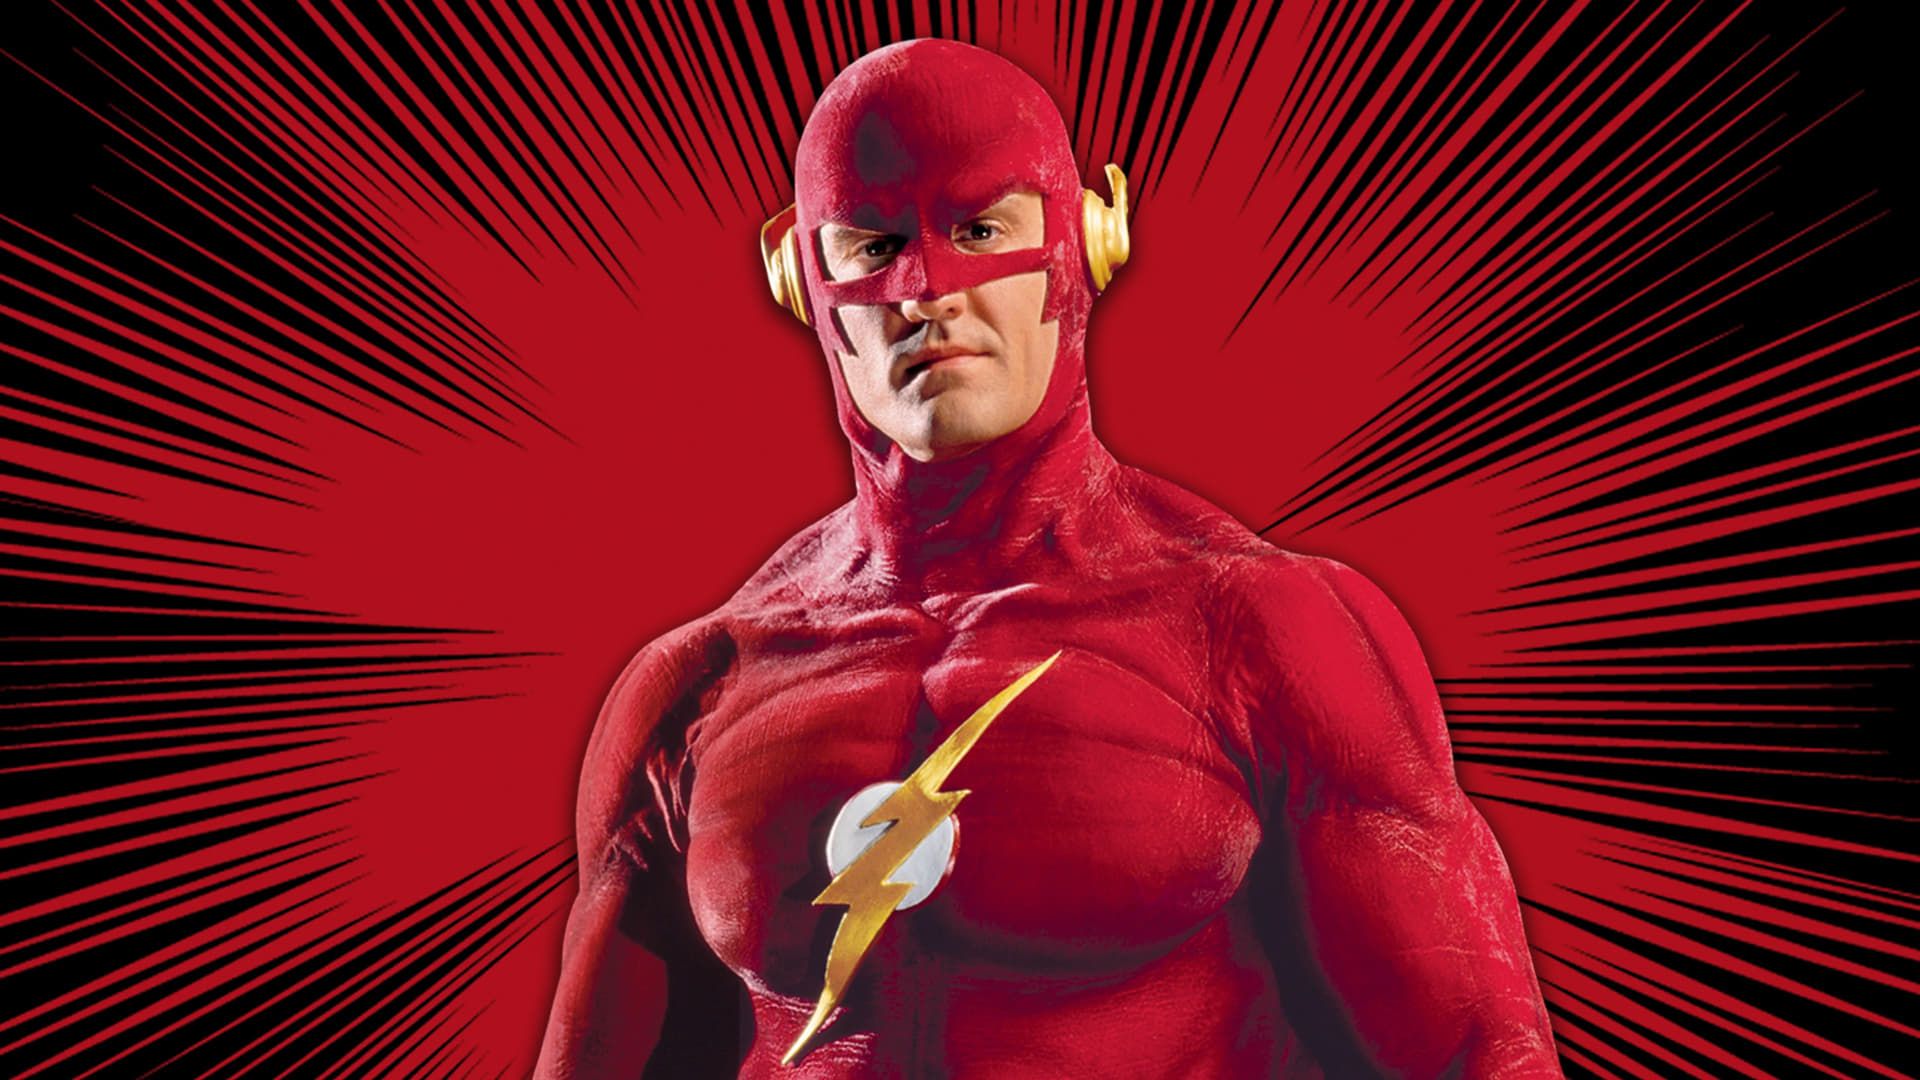 The Flash - Watch Episodes on DC Universe or Streaming Online | Reelgood